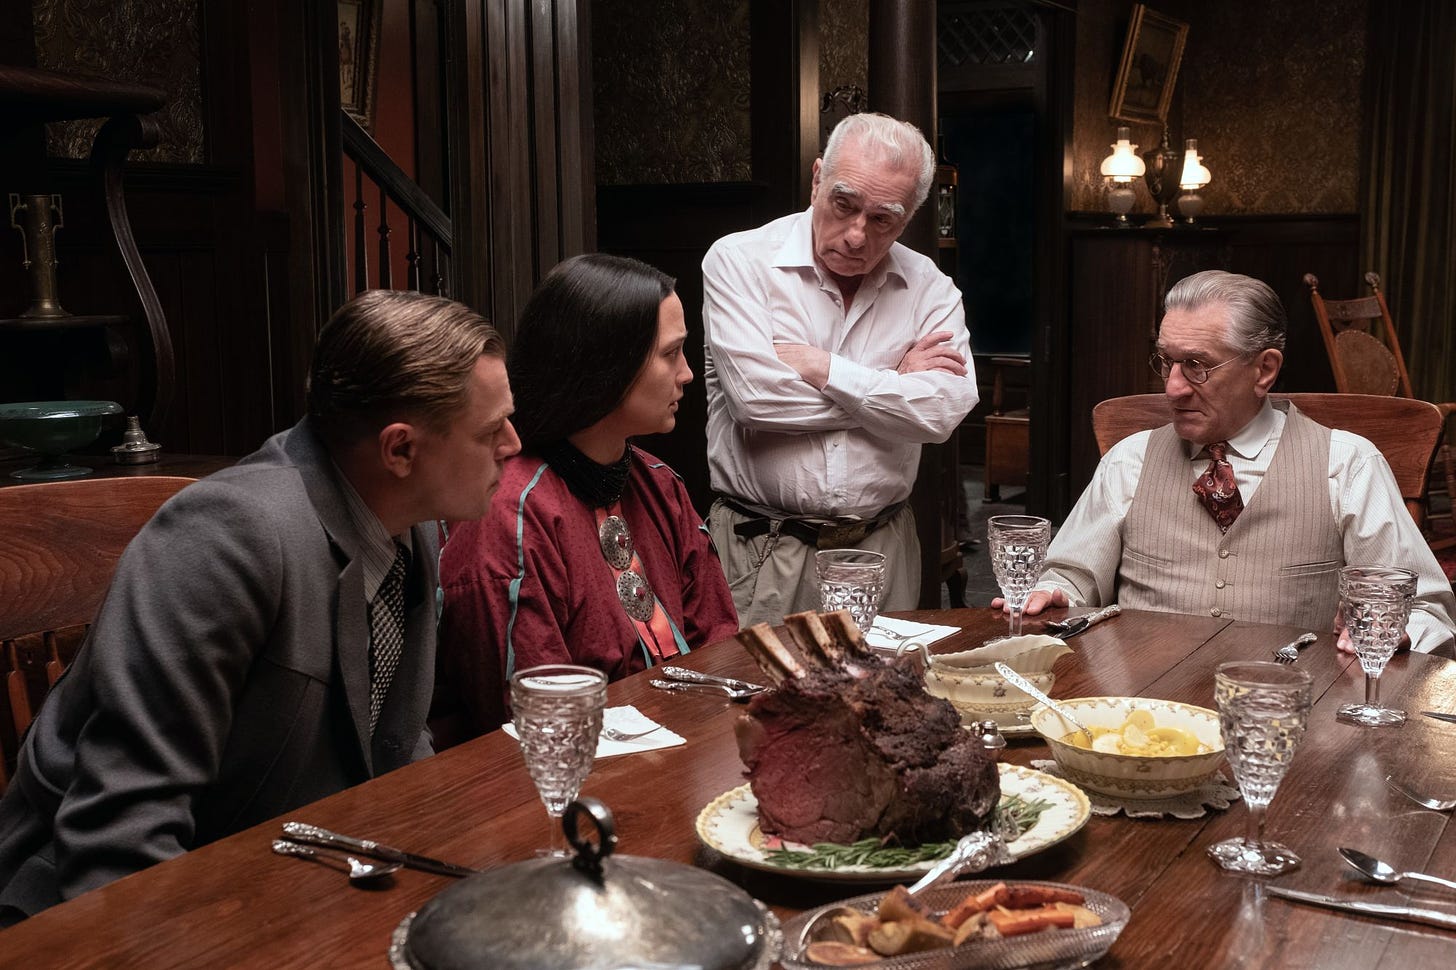 Leonardo DiCaprio, Lily Gladstone, and Robert De Niro in constume and character at a dinner table on the set of Killers of the Flower Moon while Director Martin Scorsese stands with them talking